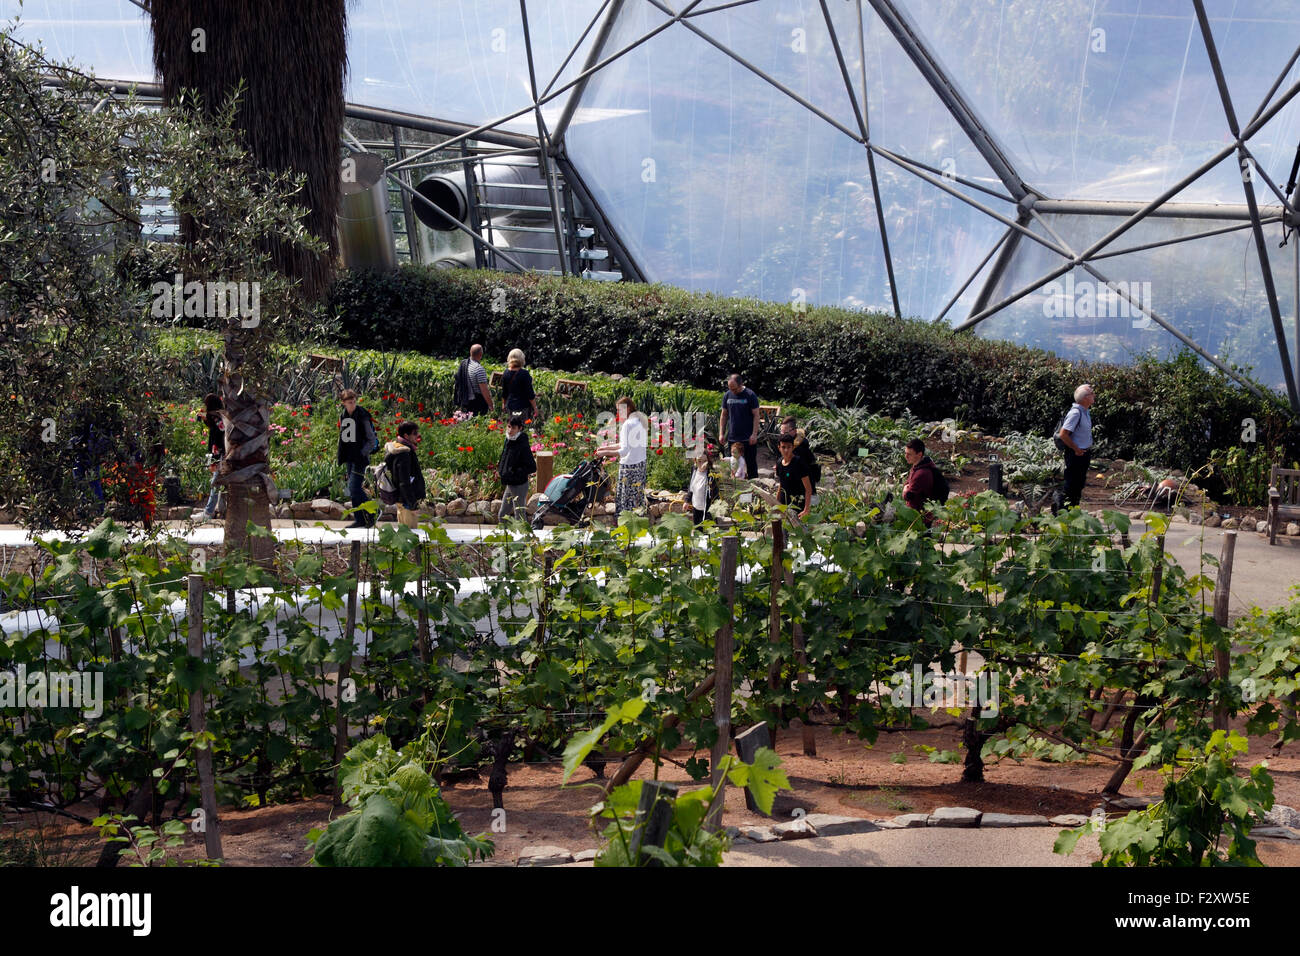 THE MEDITERRANEAN BIOME AT THE EDEN PROJECT. BODELVA CORNWALL UK. Stock Photo